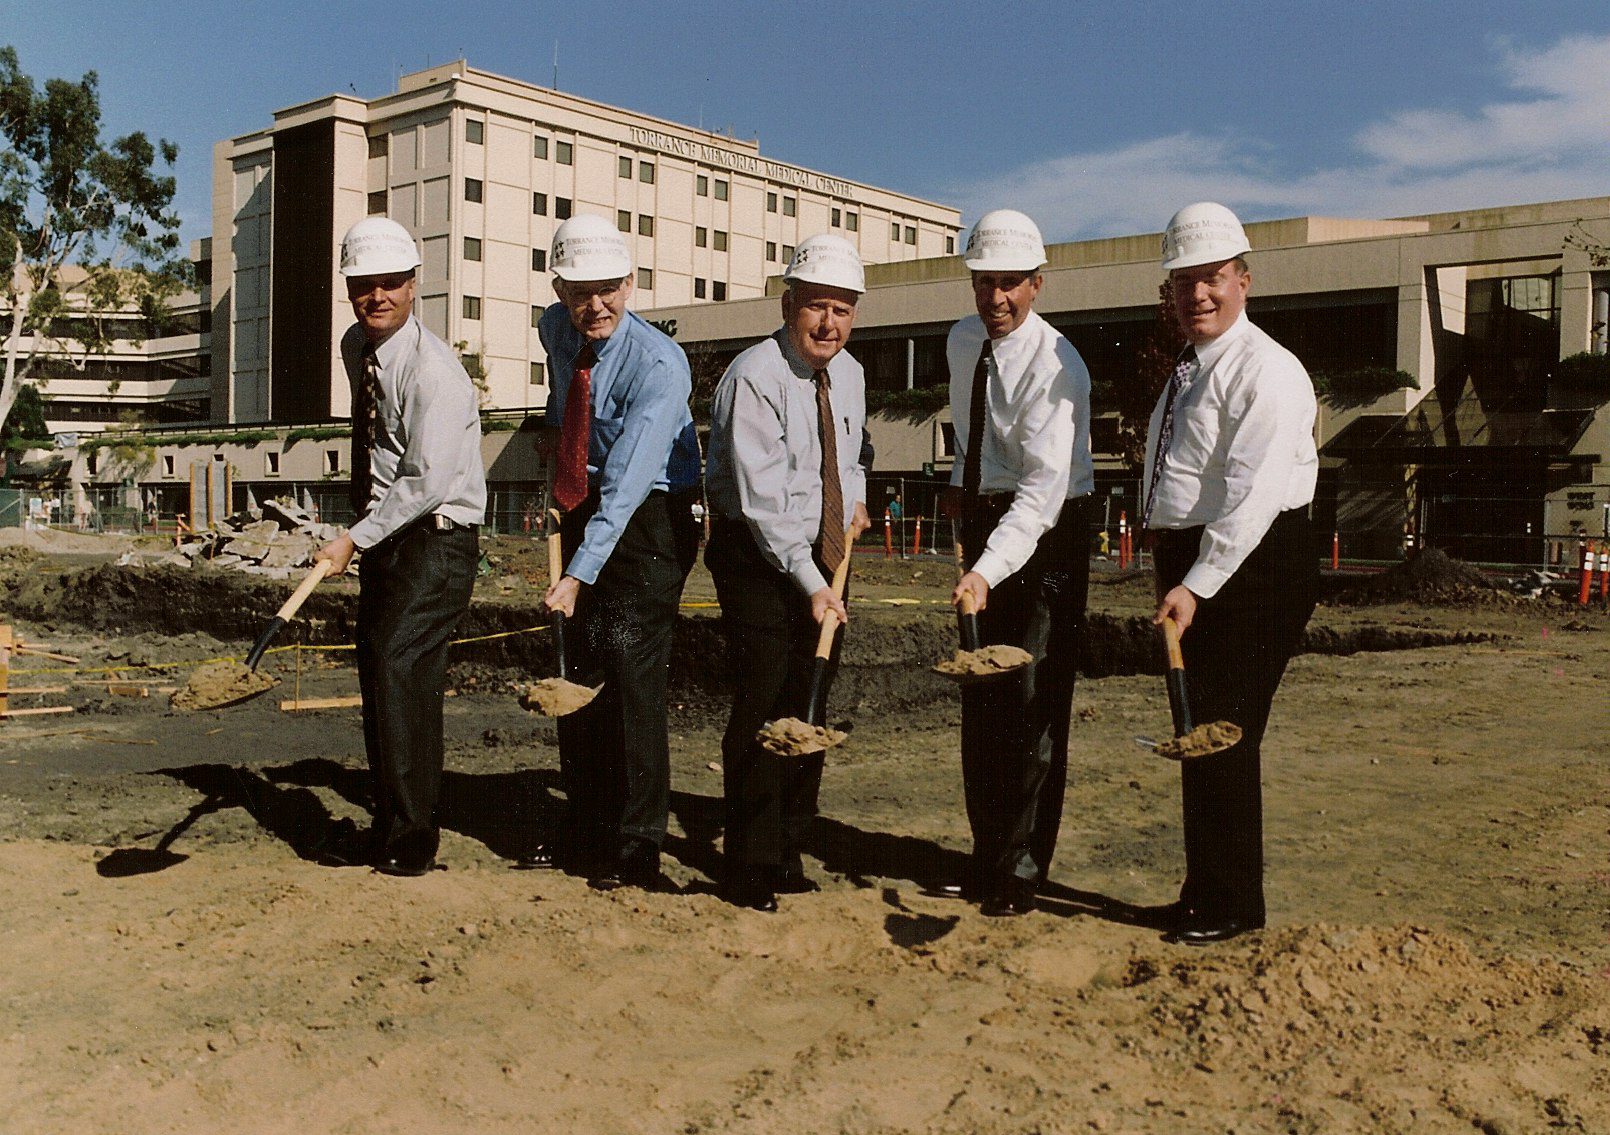 William Averill, MD, Thomas Simko, MD, George Graham, Craig Leach and William Collier digging in at the West Tower groundbreaking in 2003